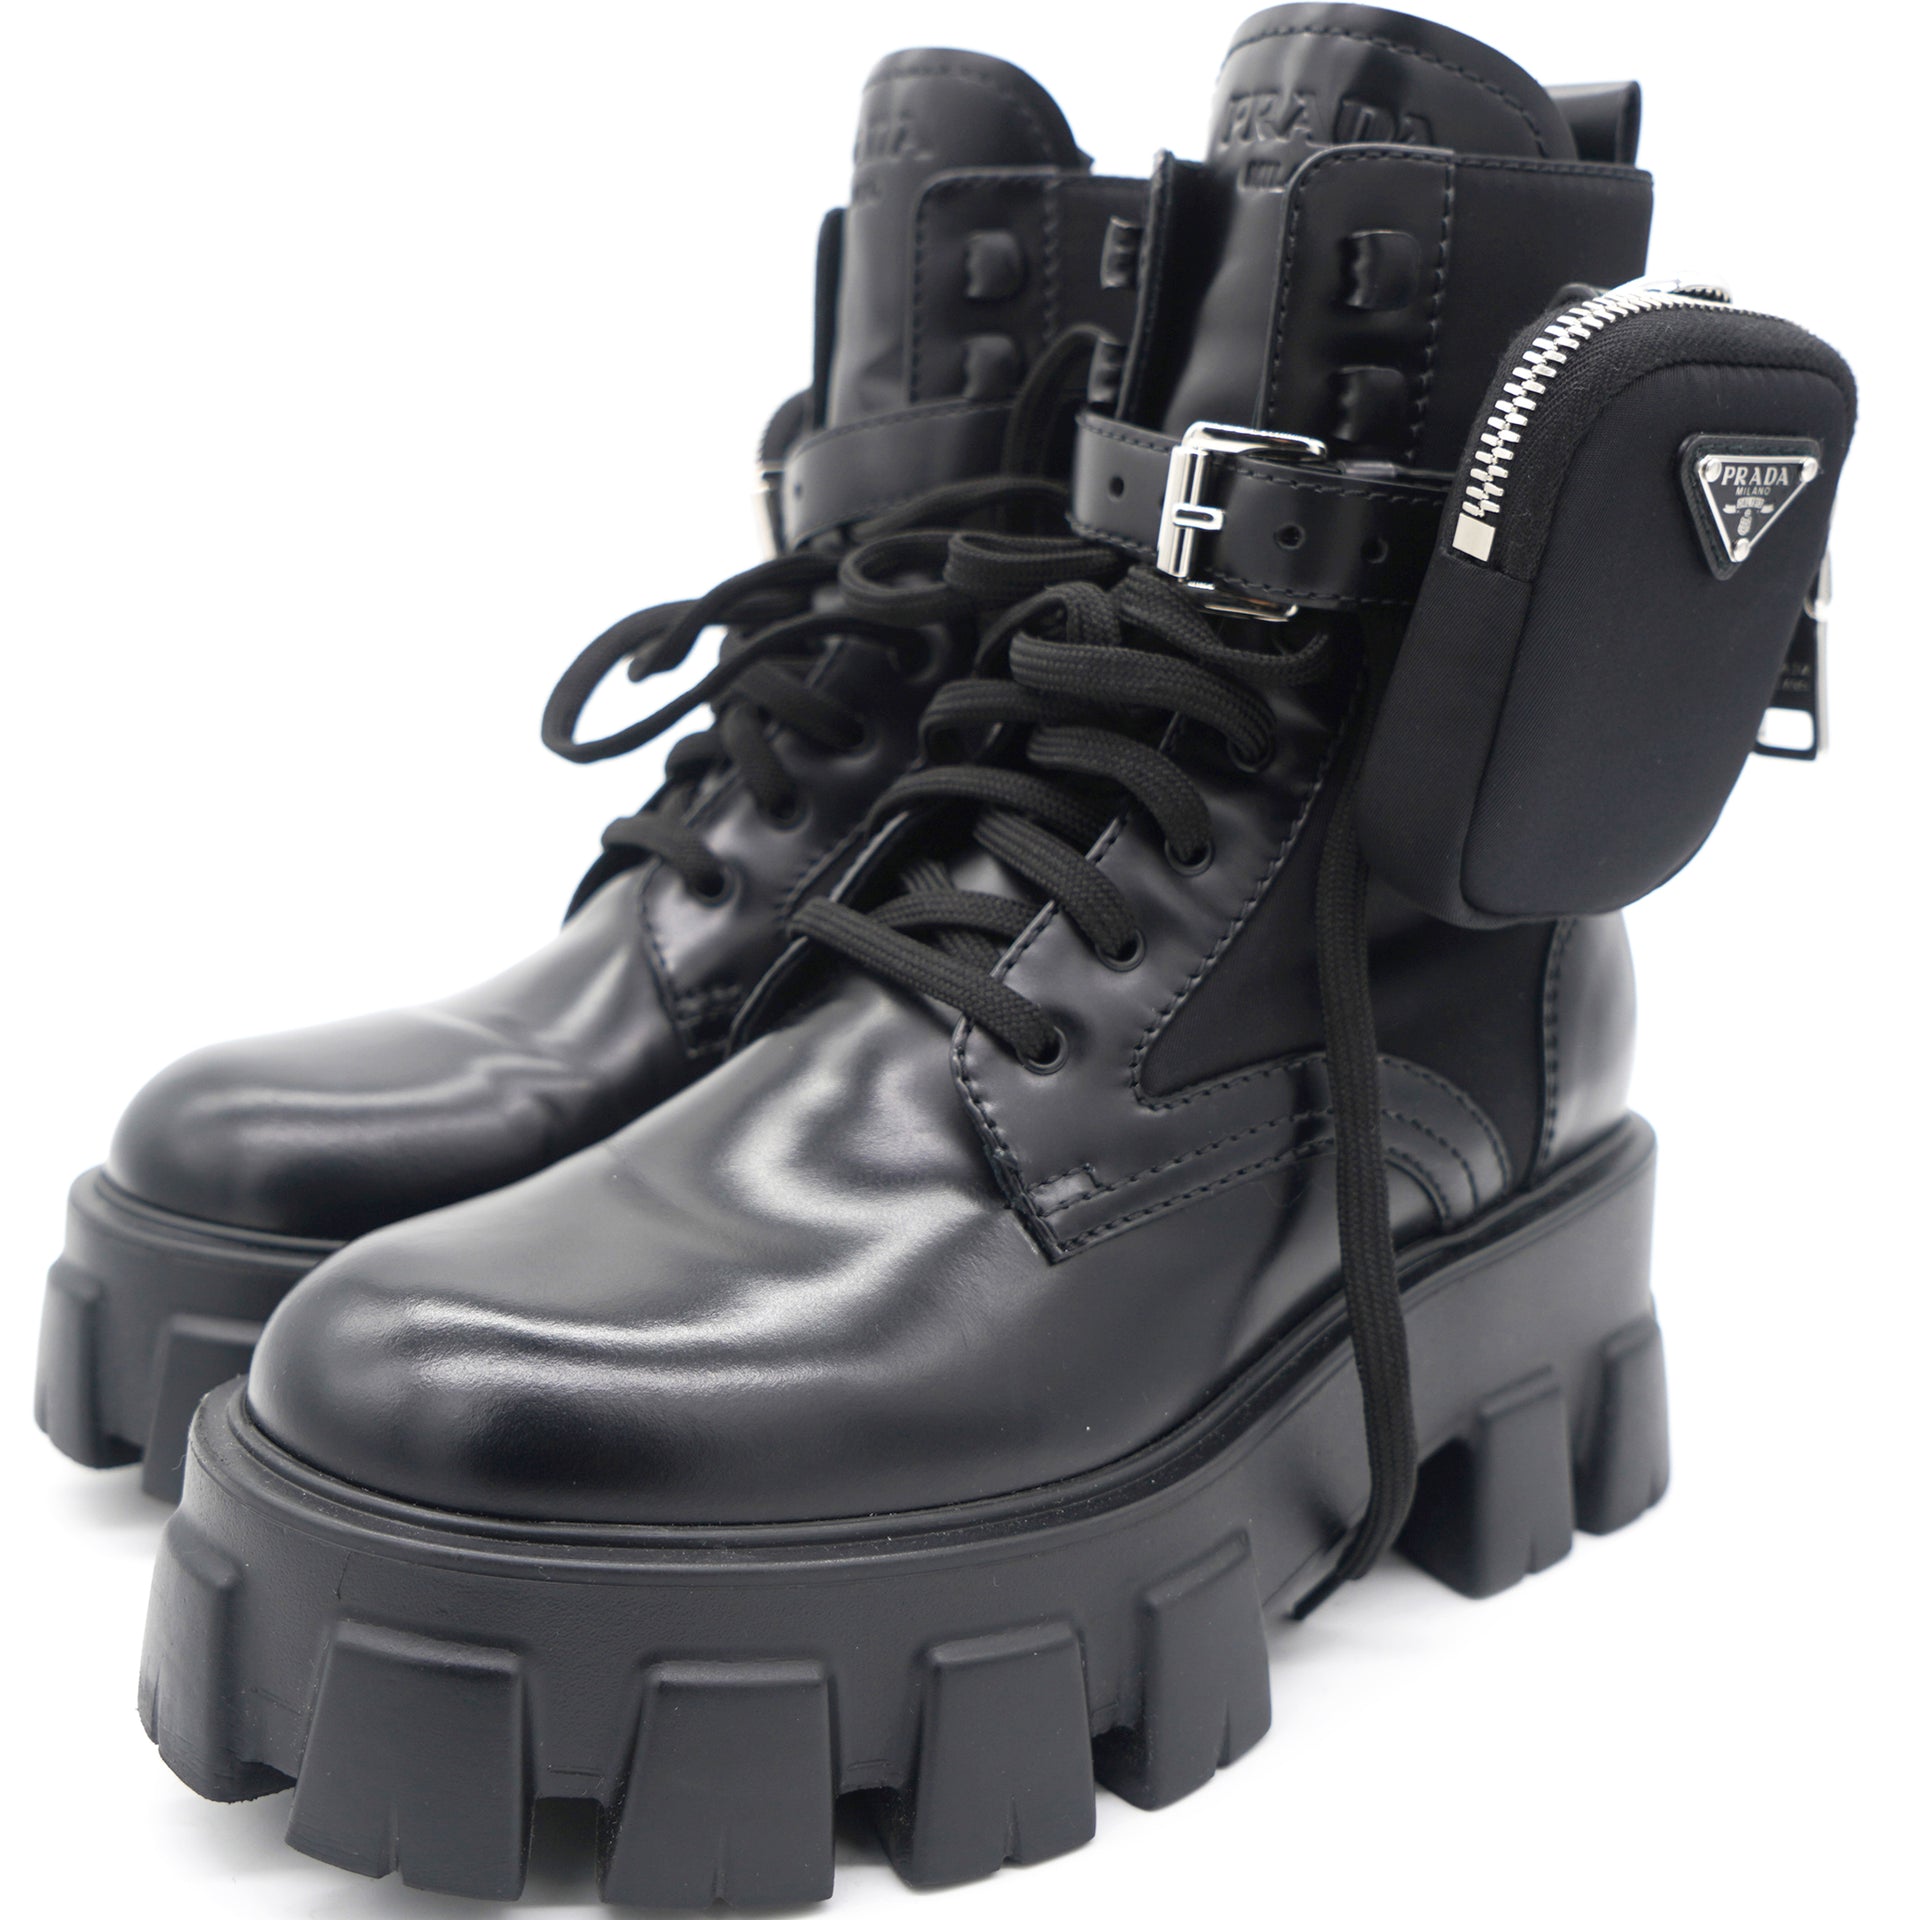 Monolith leather and Nylon Boots 37